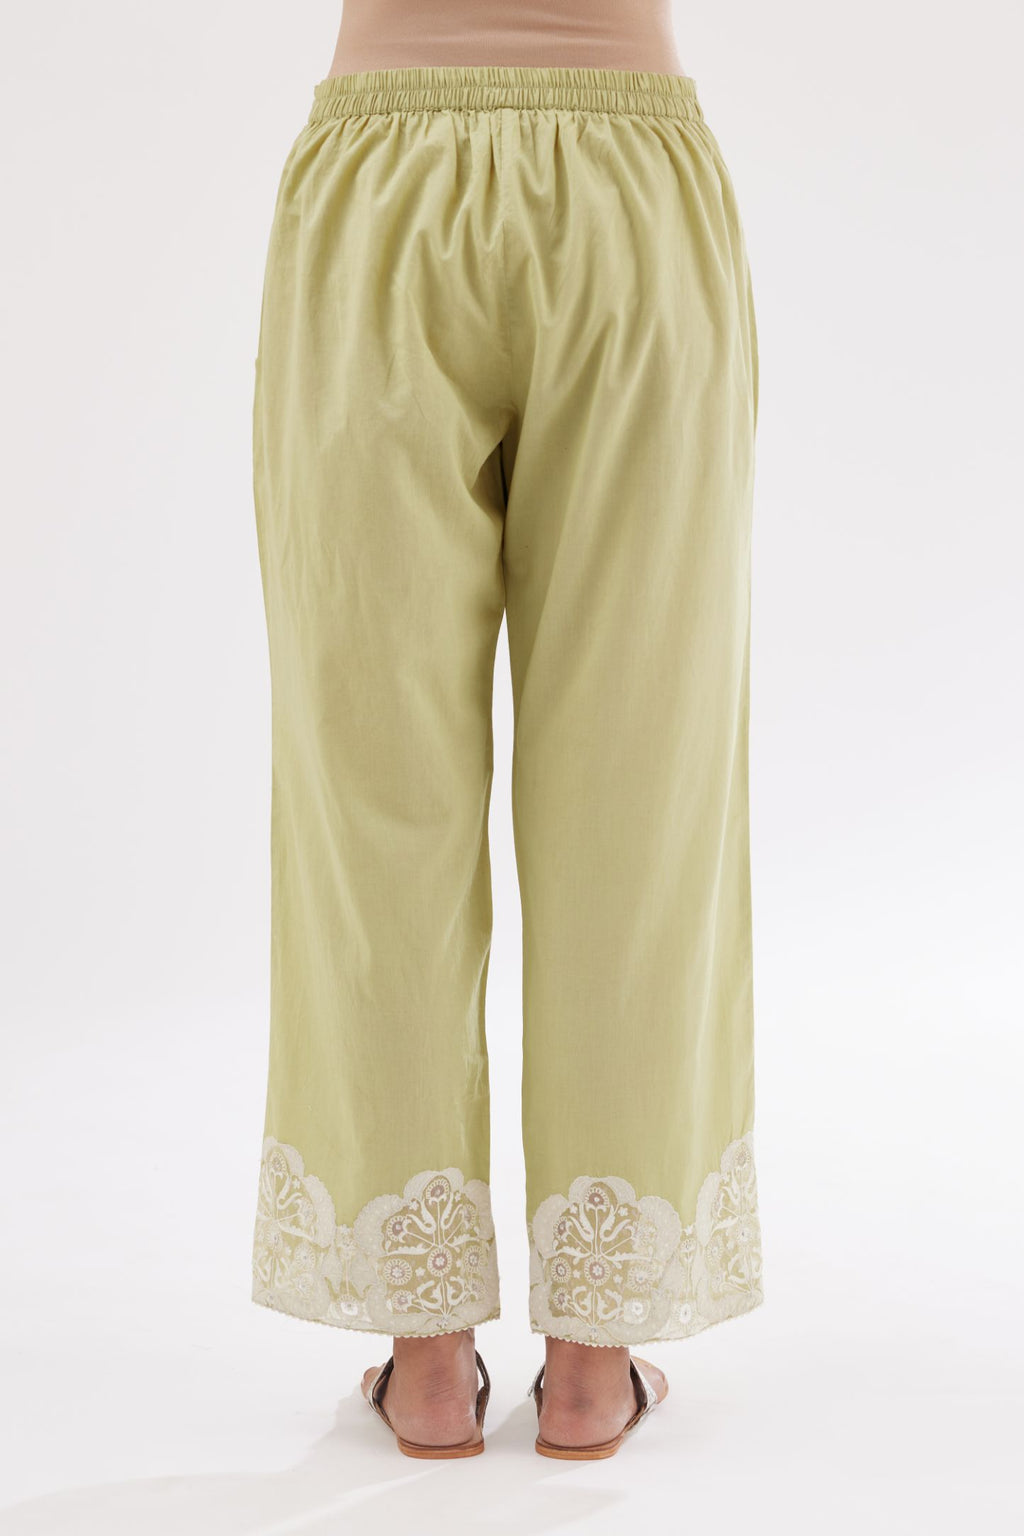 Green cotton straight pants with appliqué and hand attached sequins detailing at bottom hem.